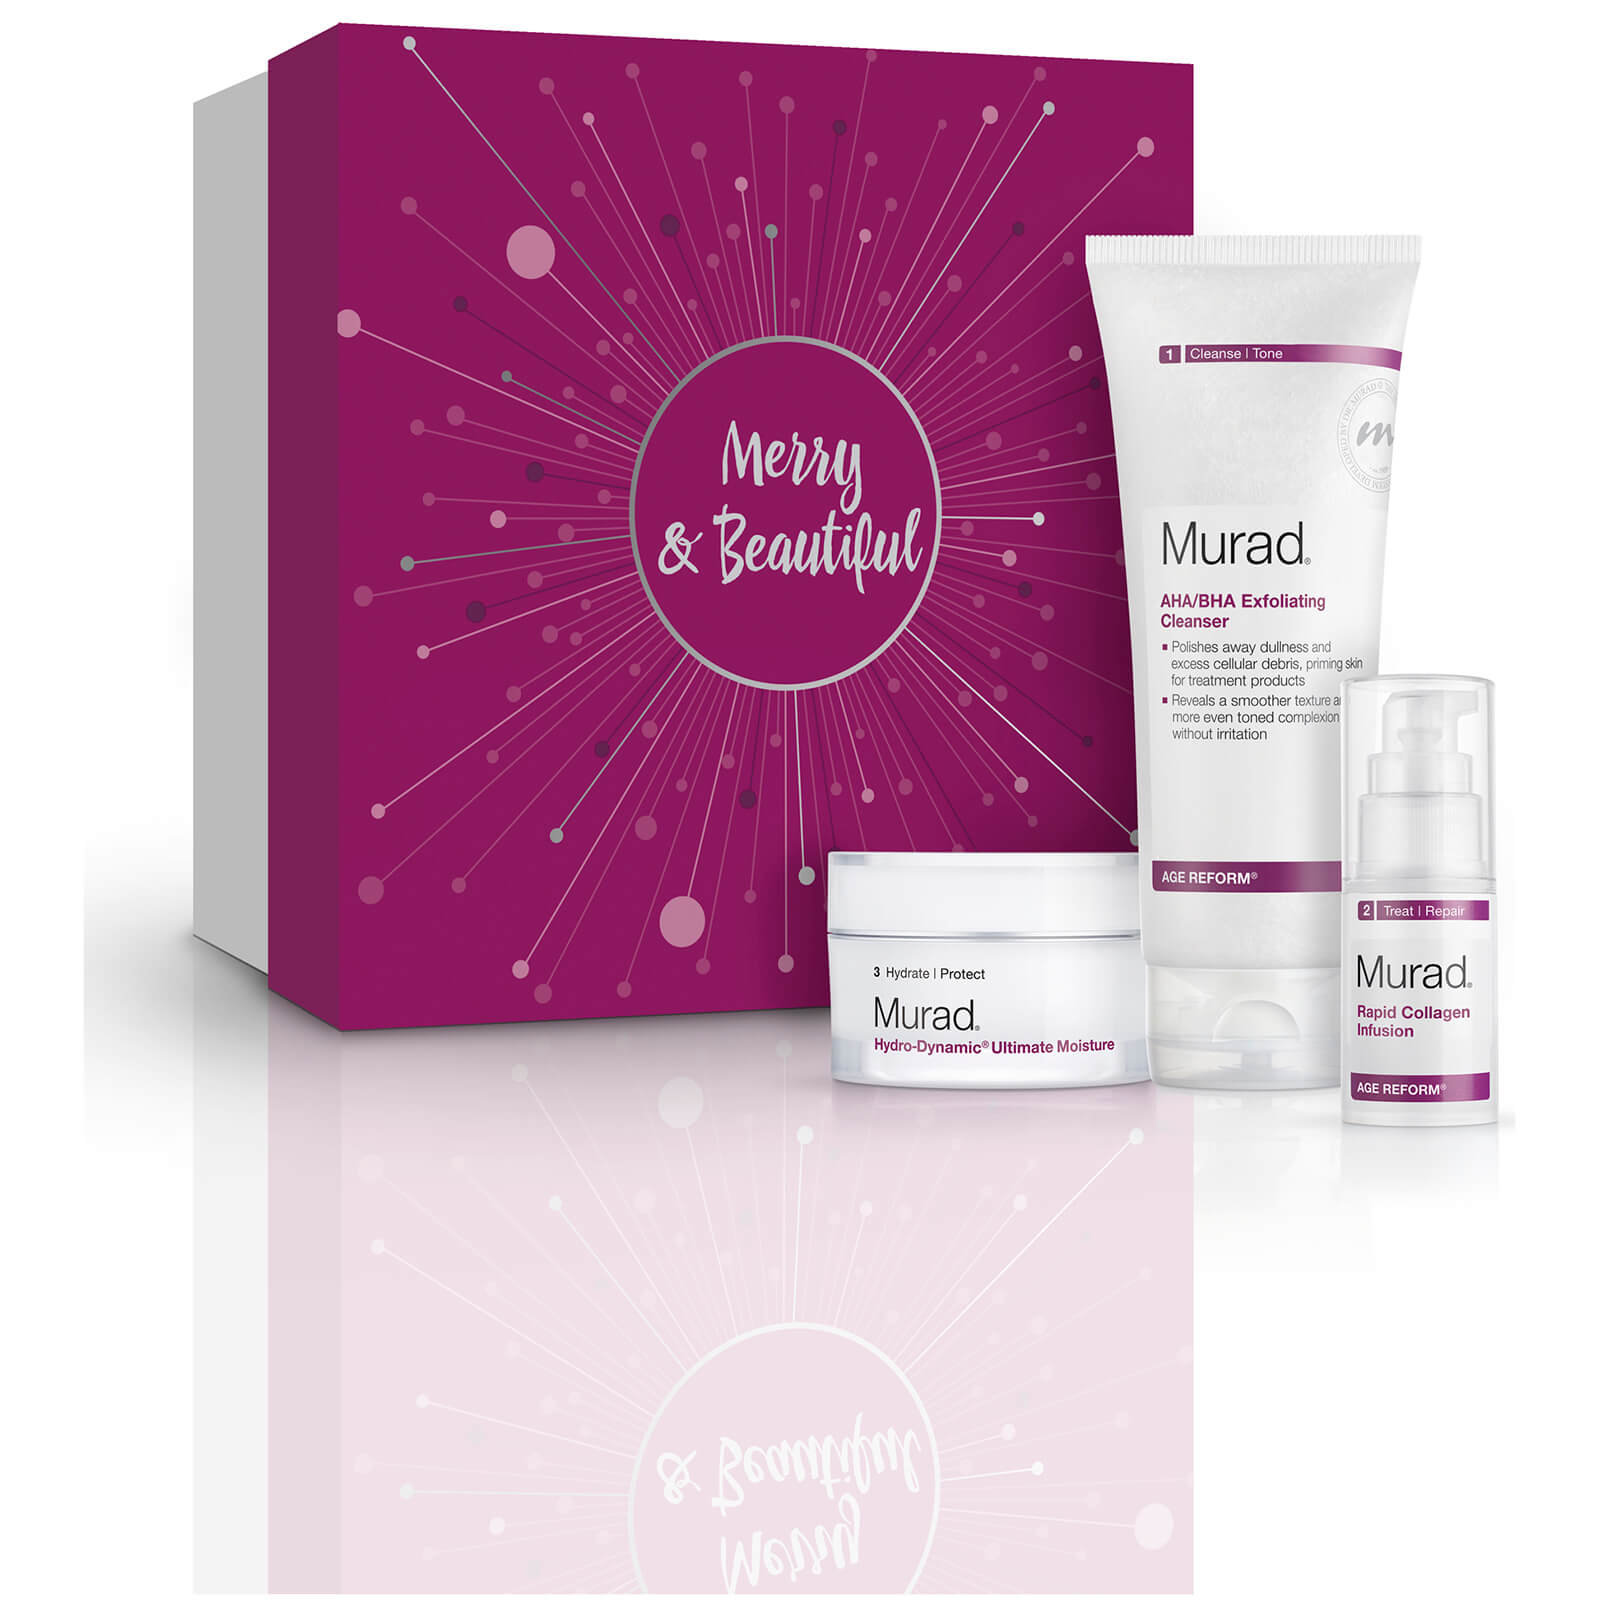 Murad Merry and Beautiful Age Reform Gift Set